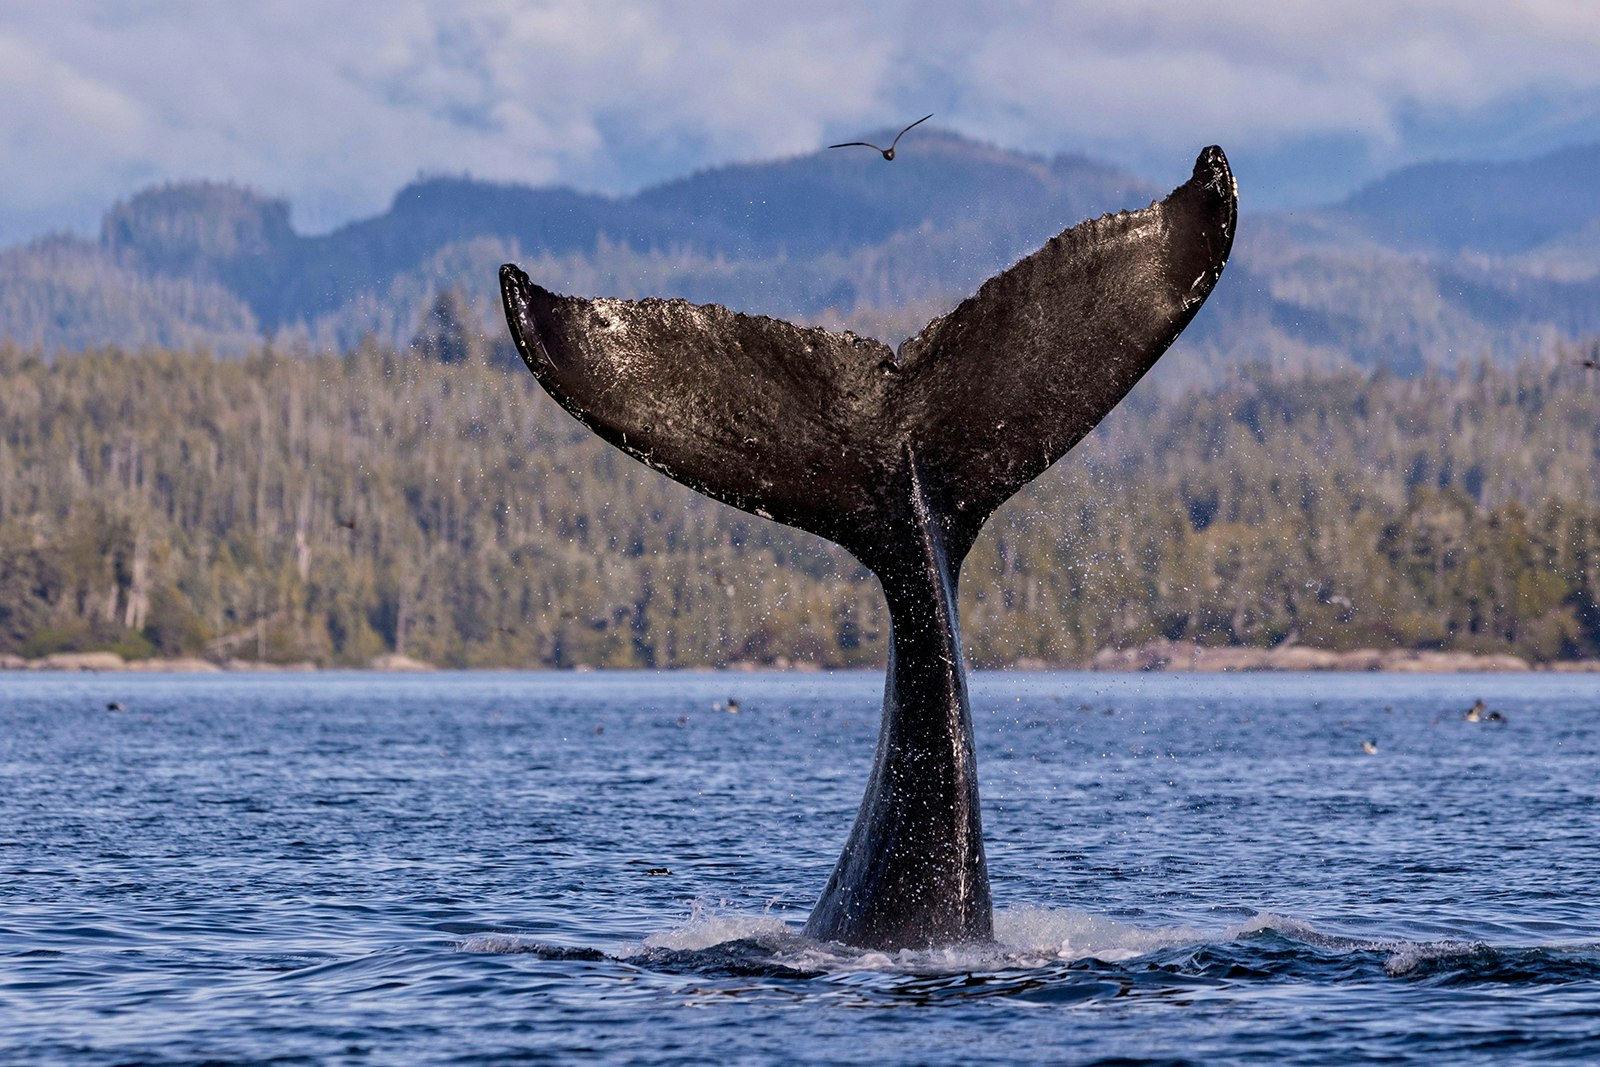 A humpback whale breaching off the coast of Vancouver Island